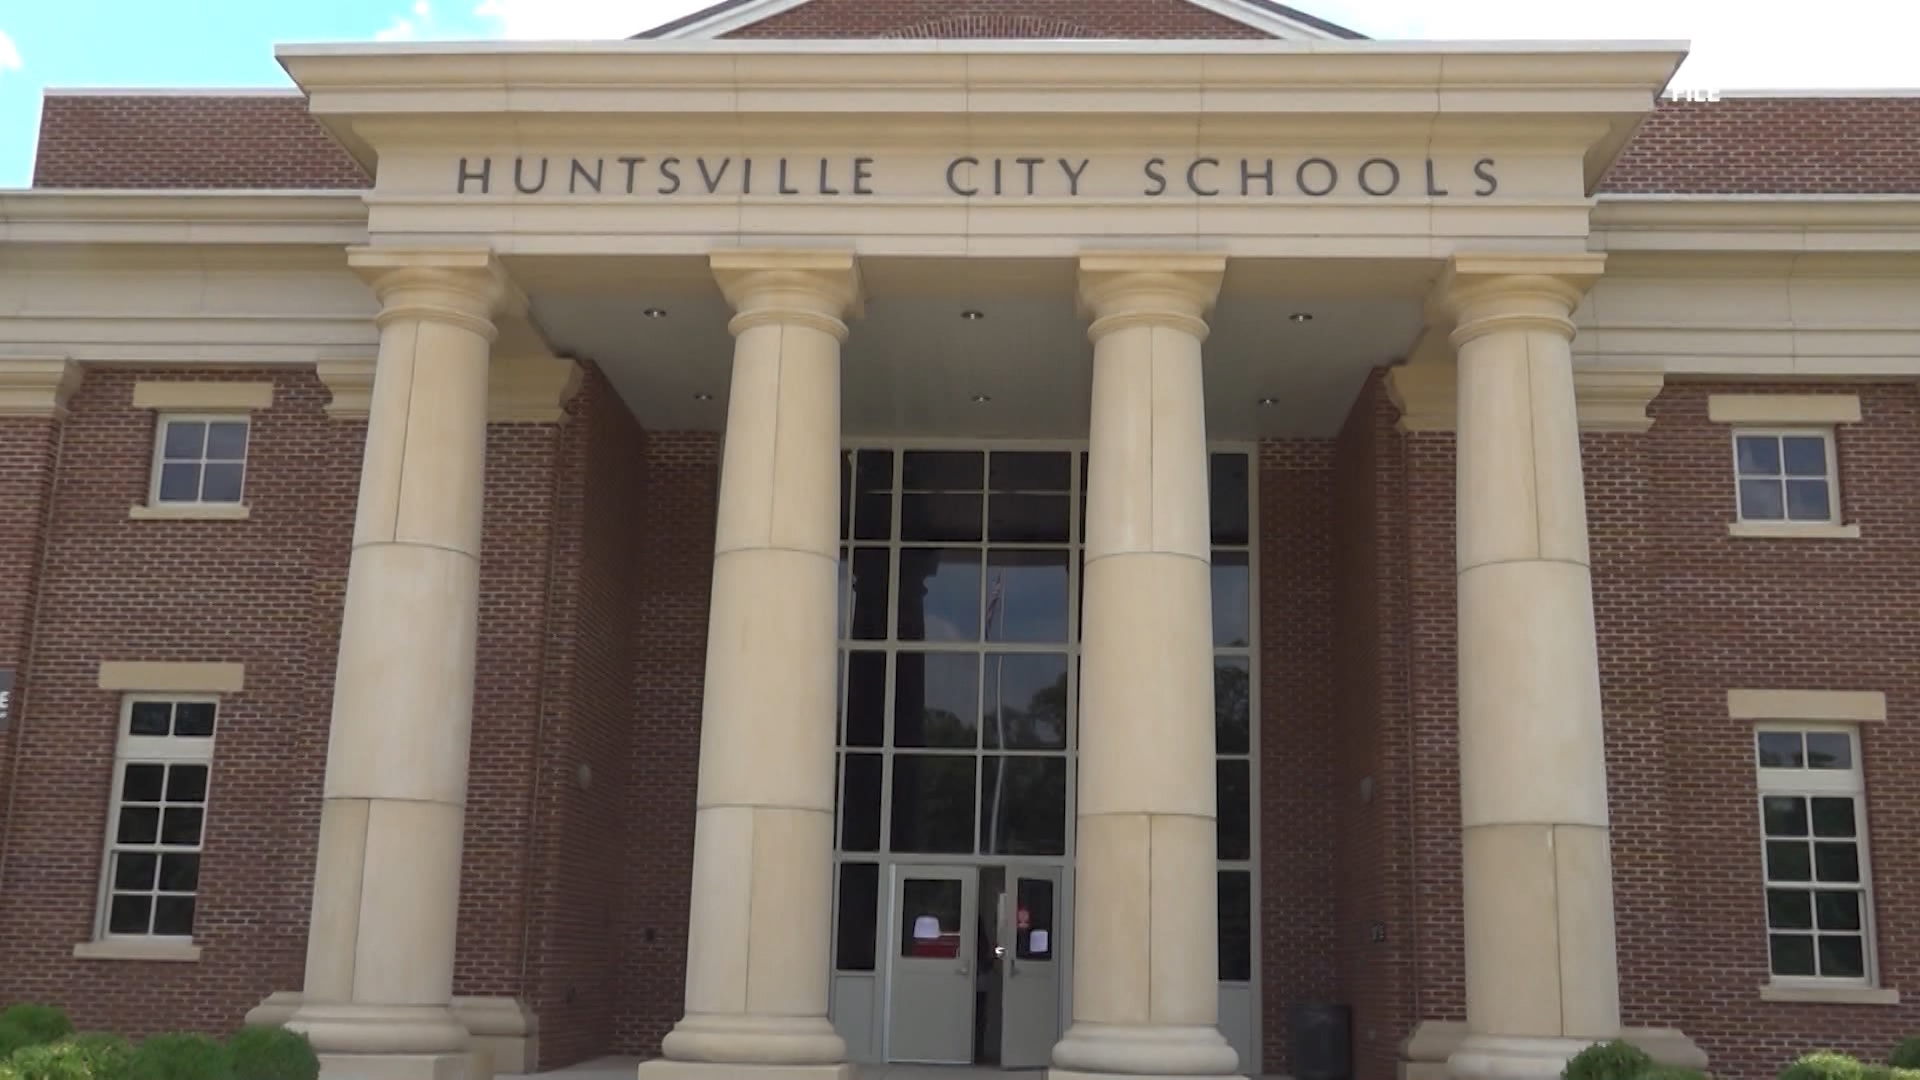 Hampton Cove parents held a town hall to share concerns over recently-passed Huntsville City Schools Capital Plan.